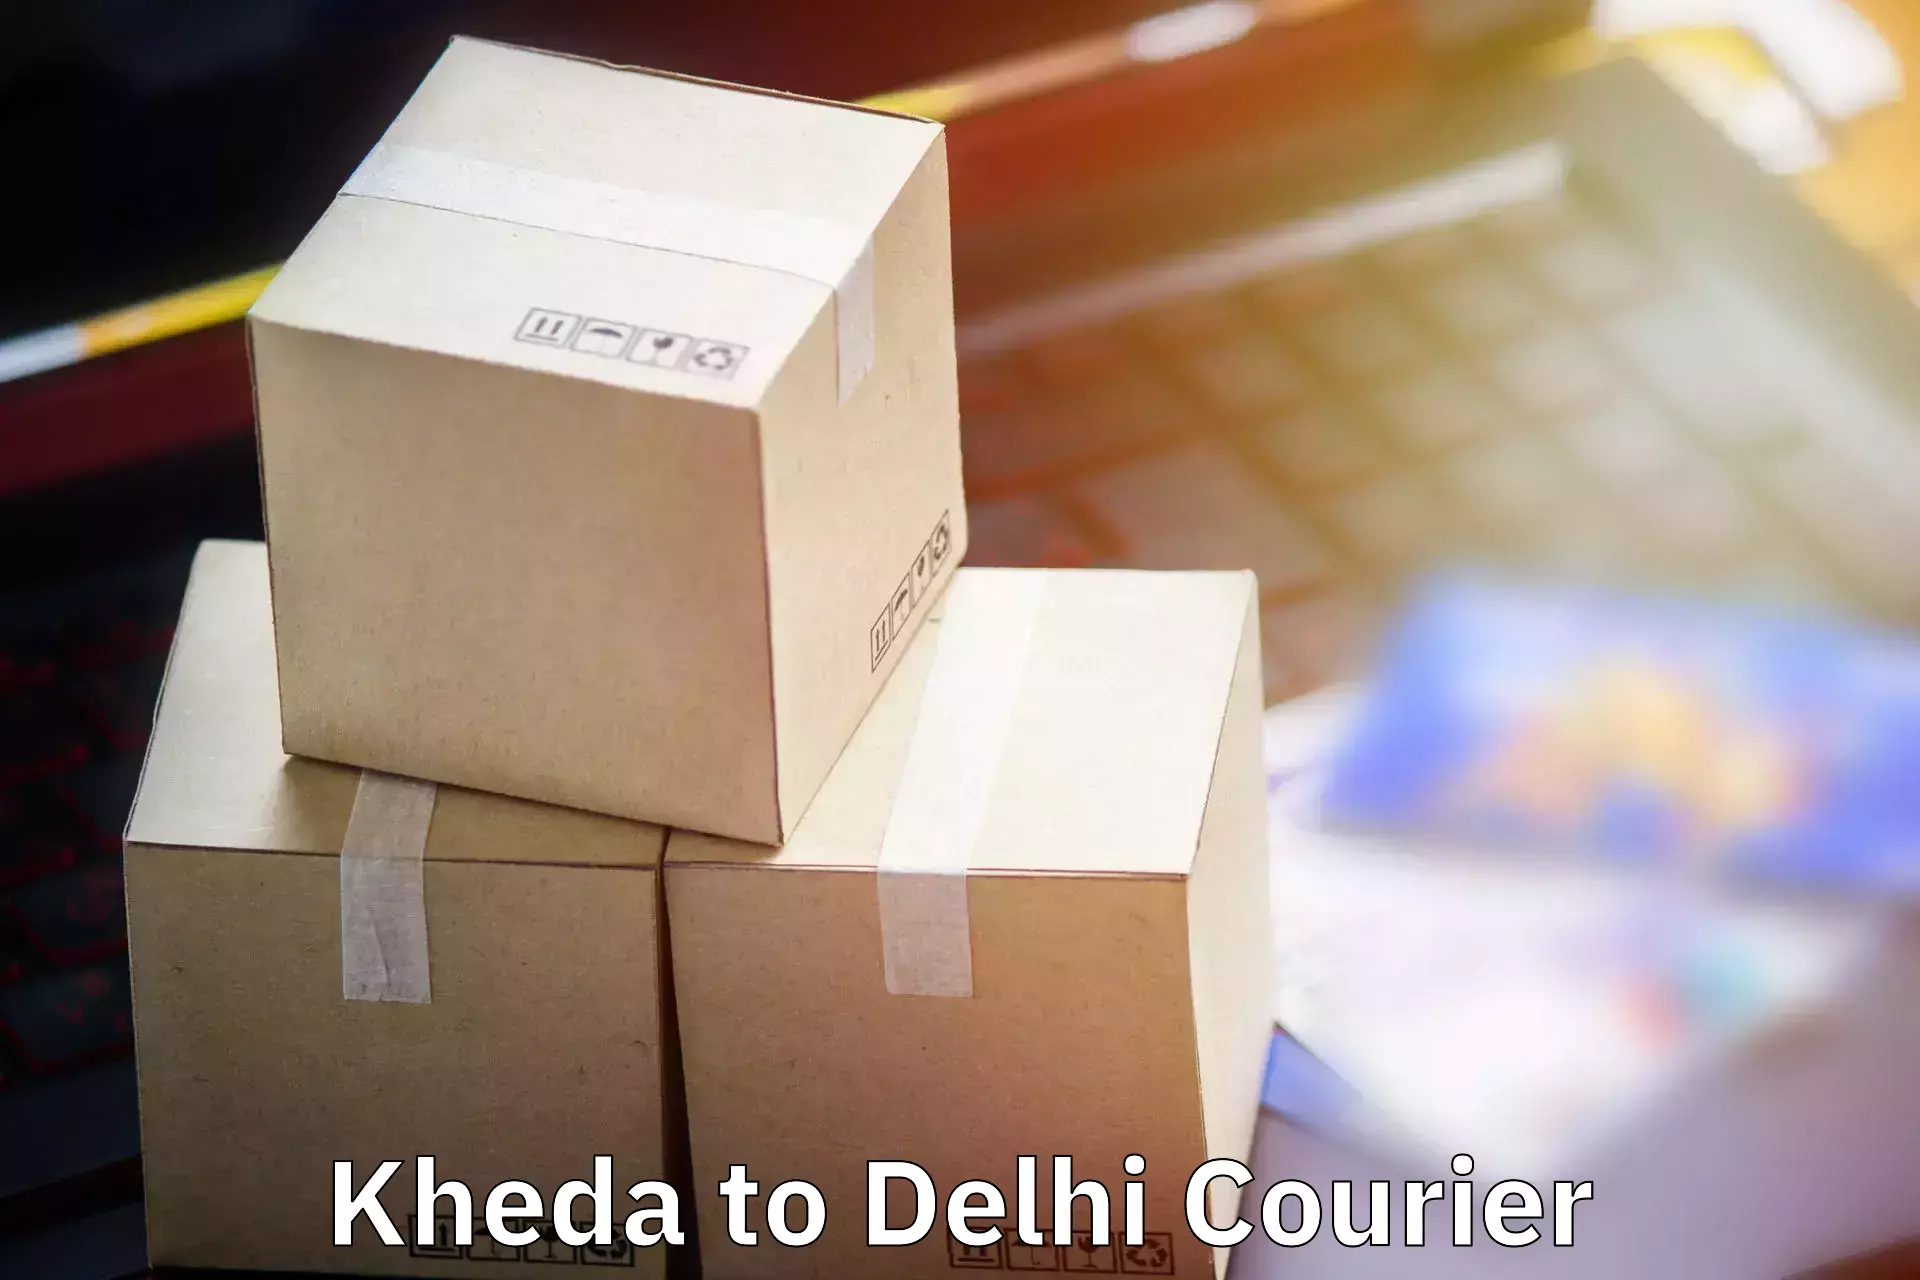 Luggage shipping specialists Kheda to Delhi